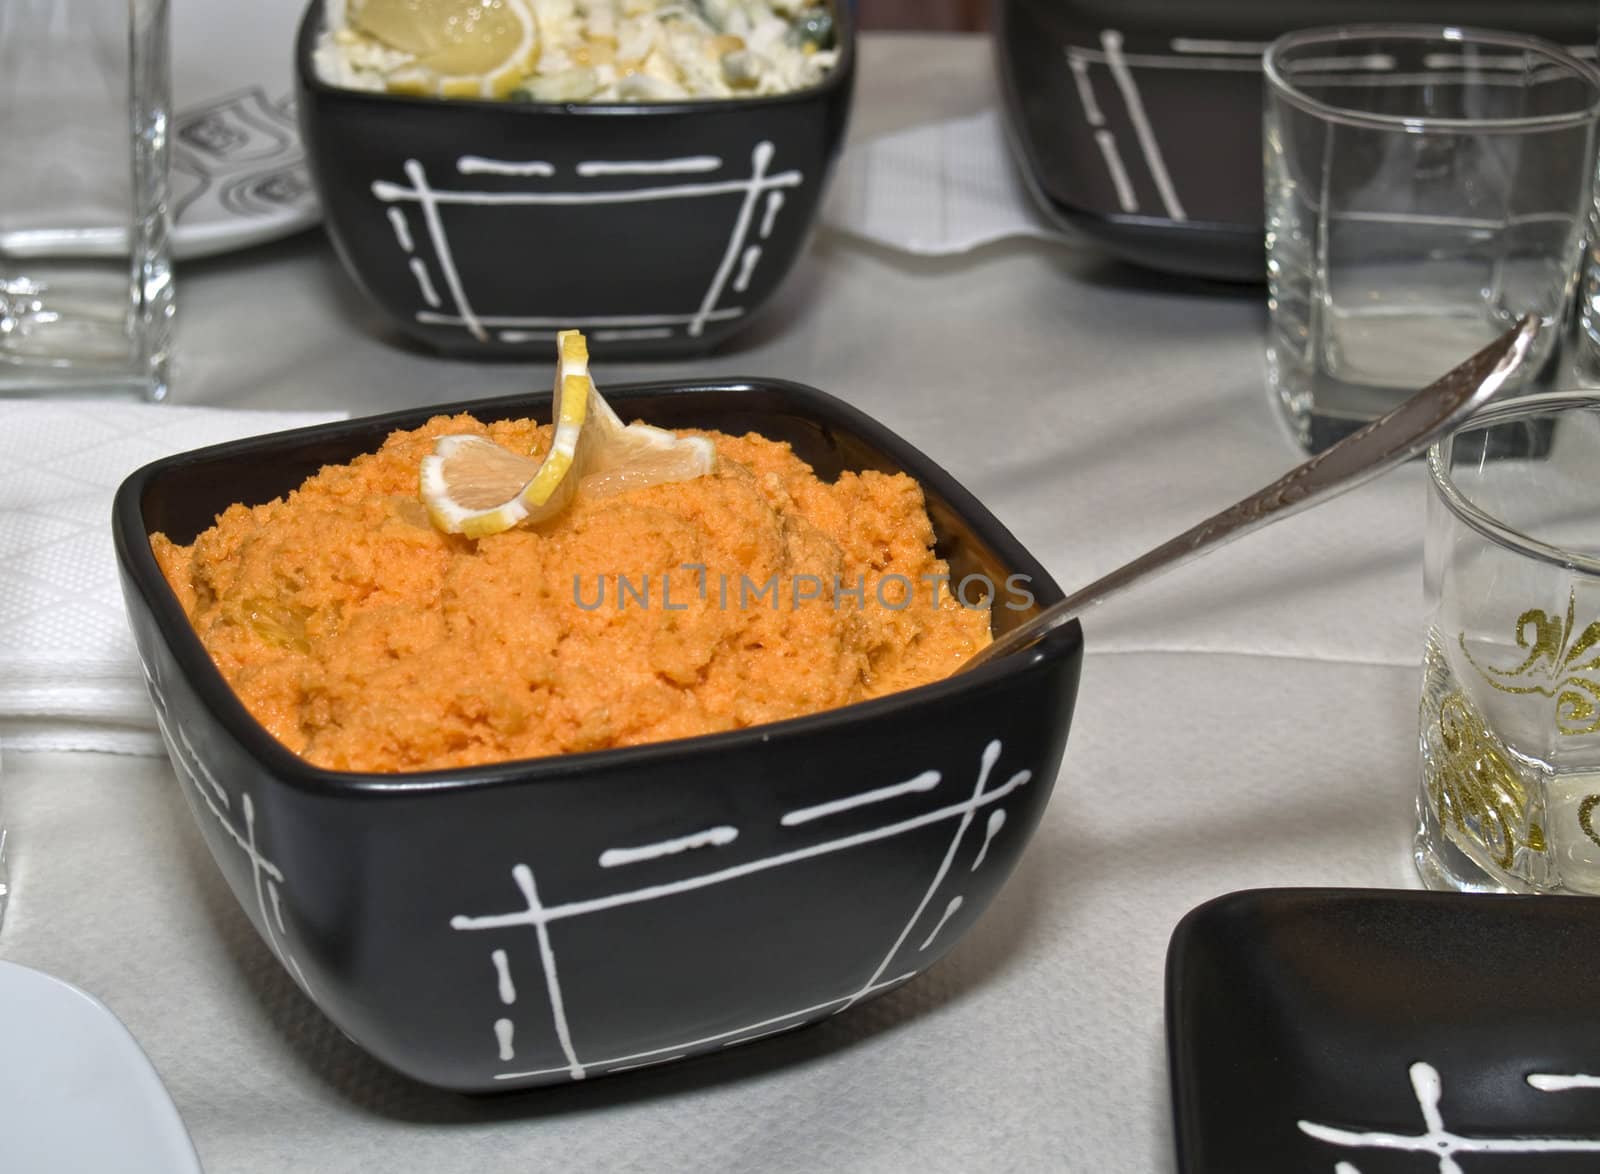 Beautifully served carrot salad in black dish